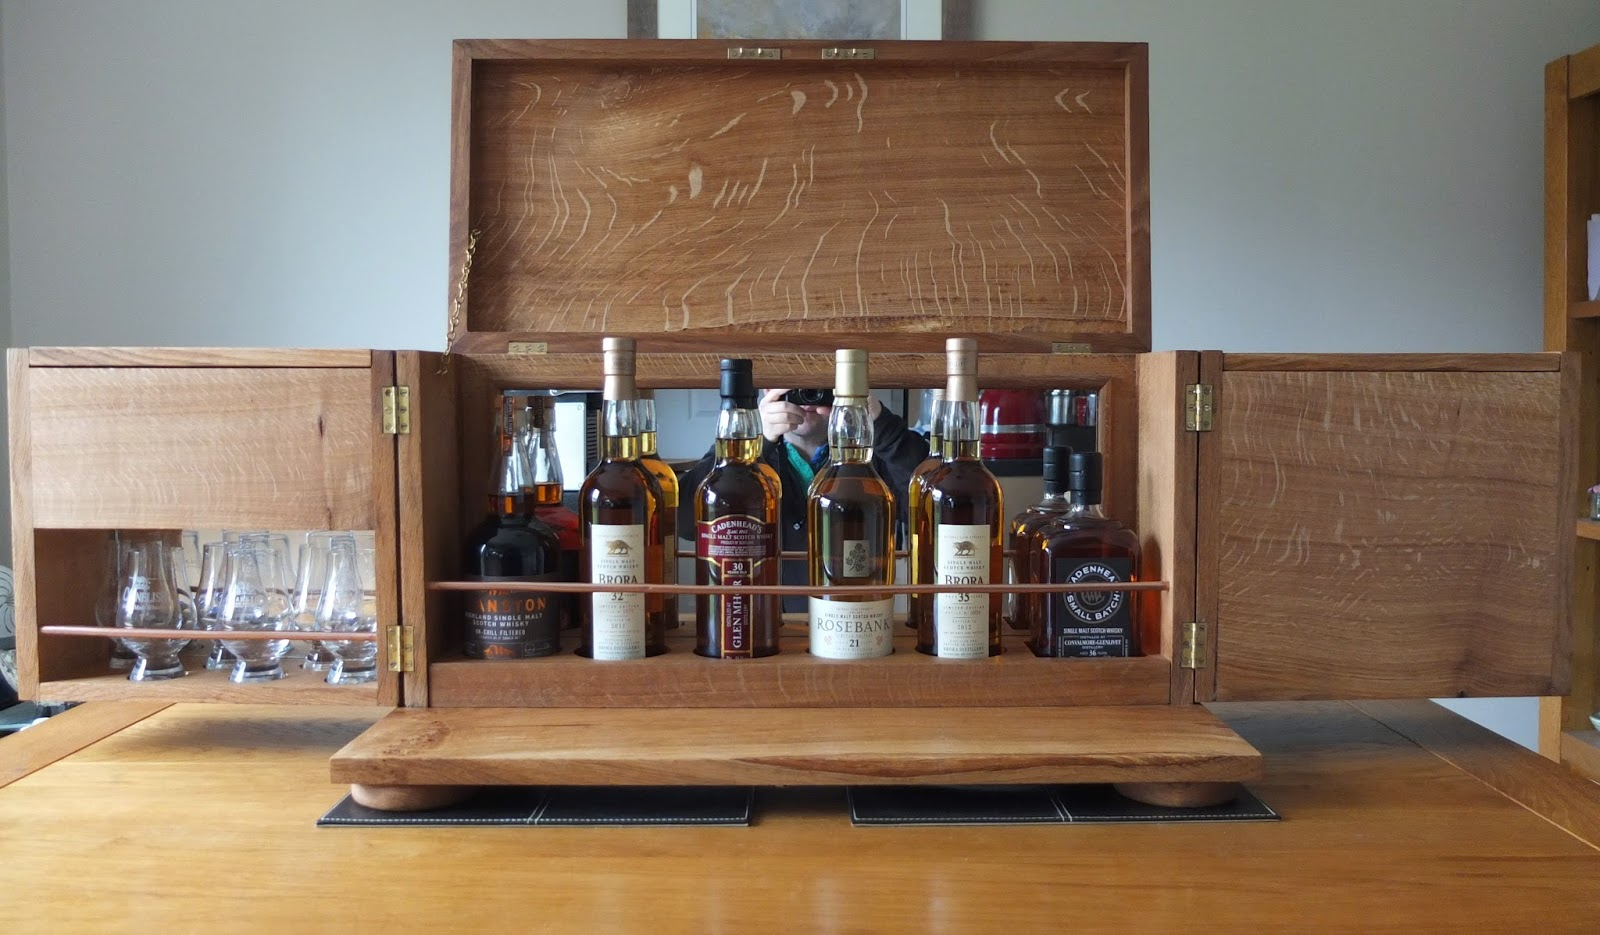 The Whisky Display Cabinet Malt Whisky Reviews regarding measurements 1600 X 935